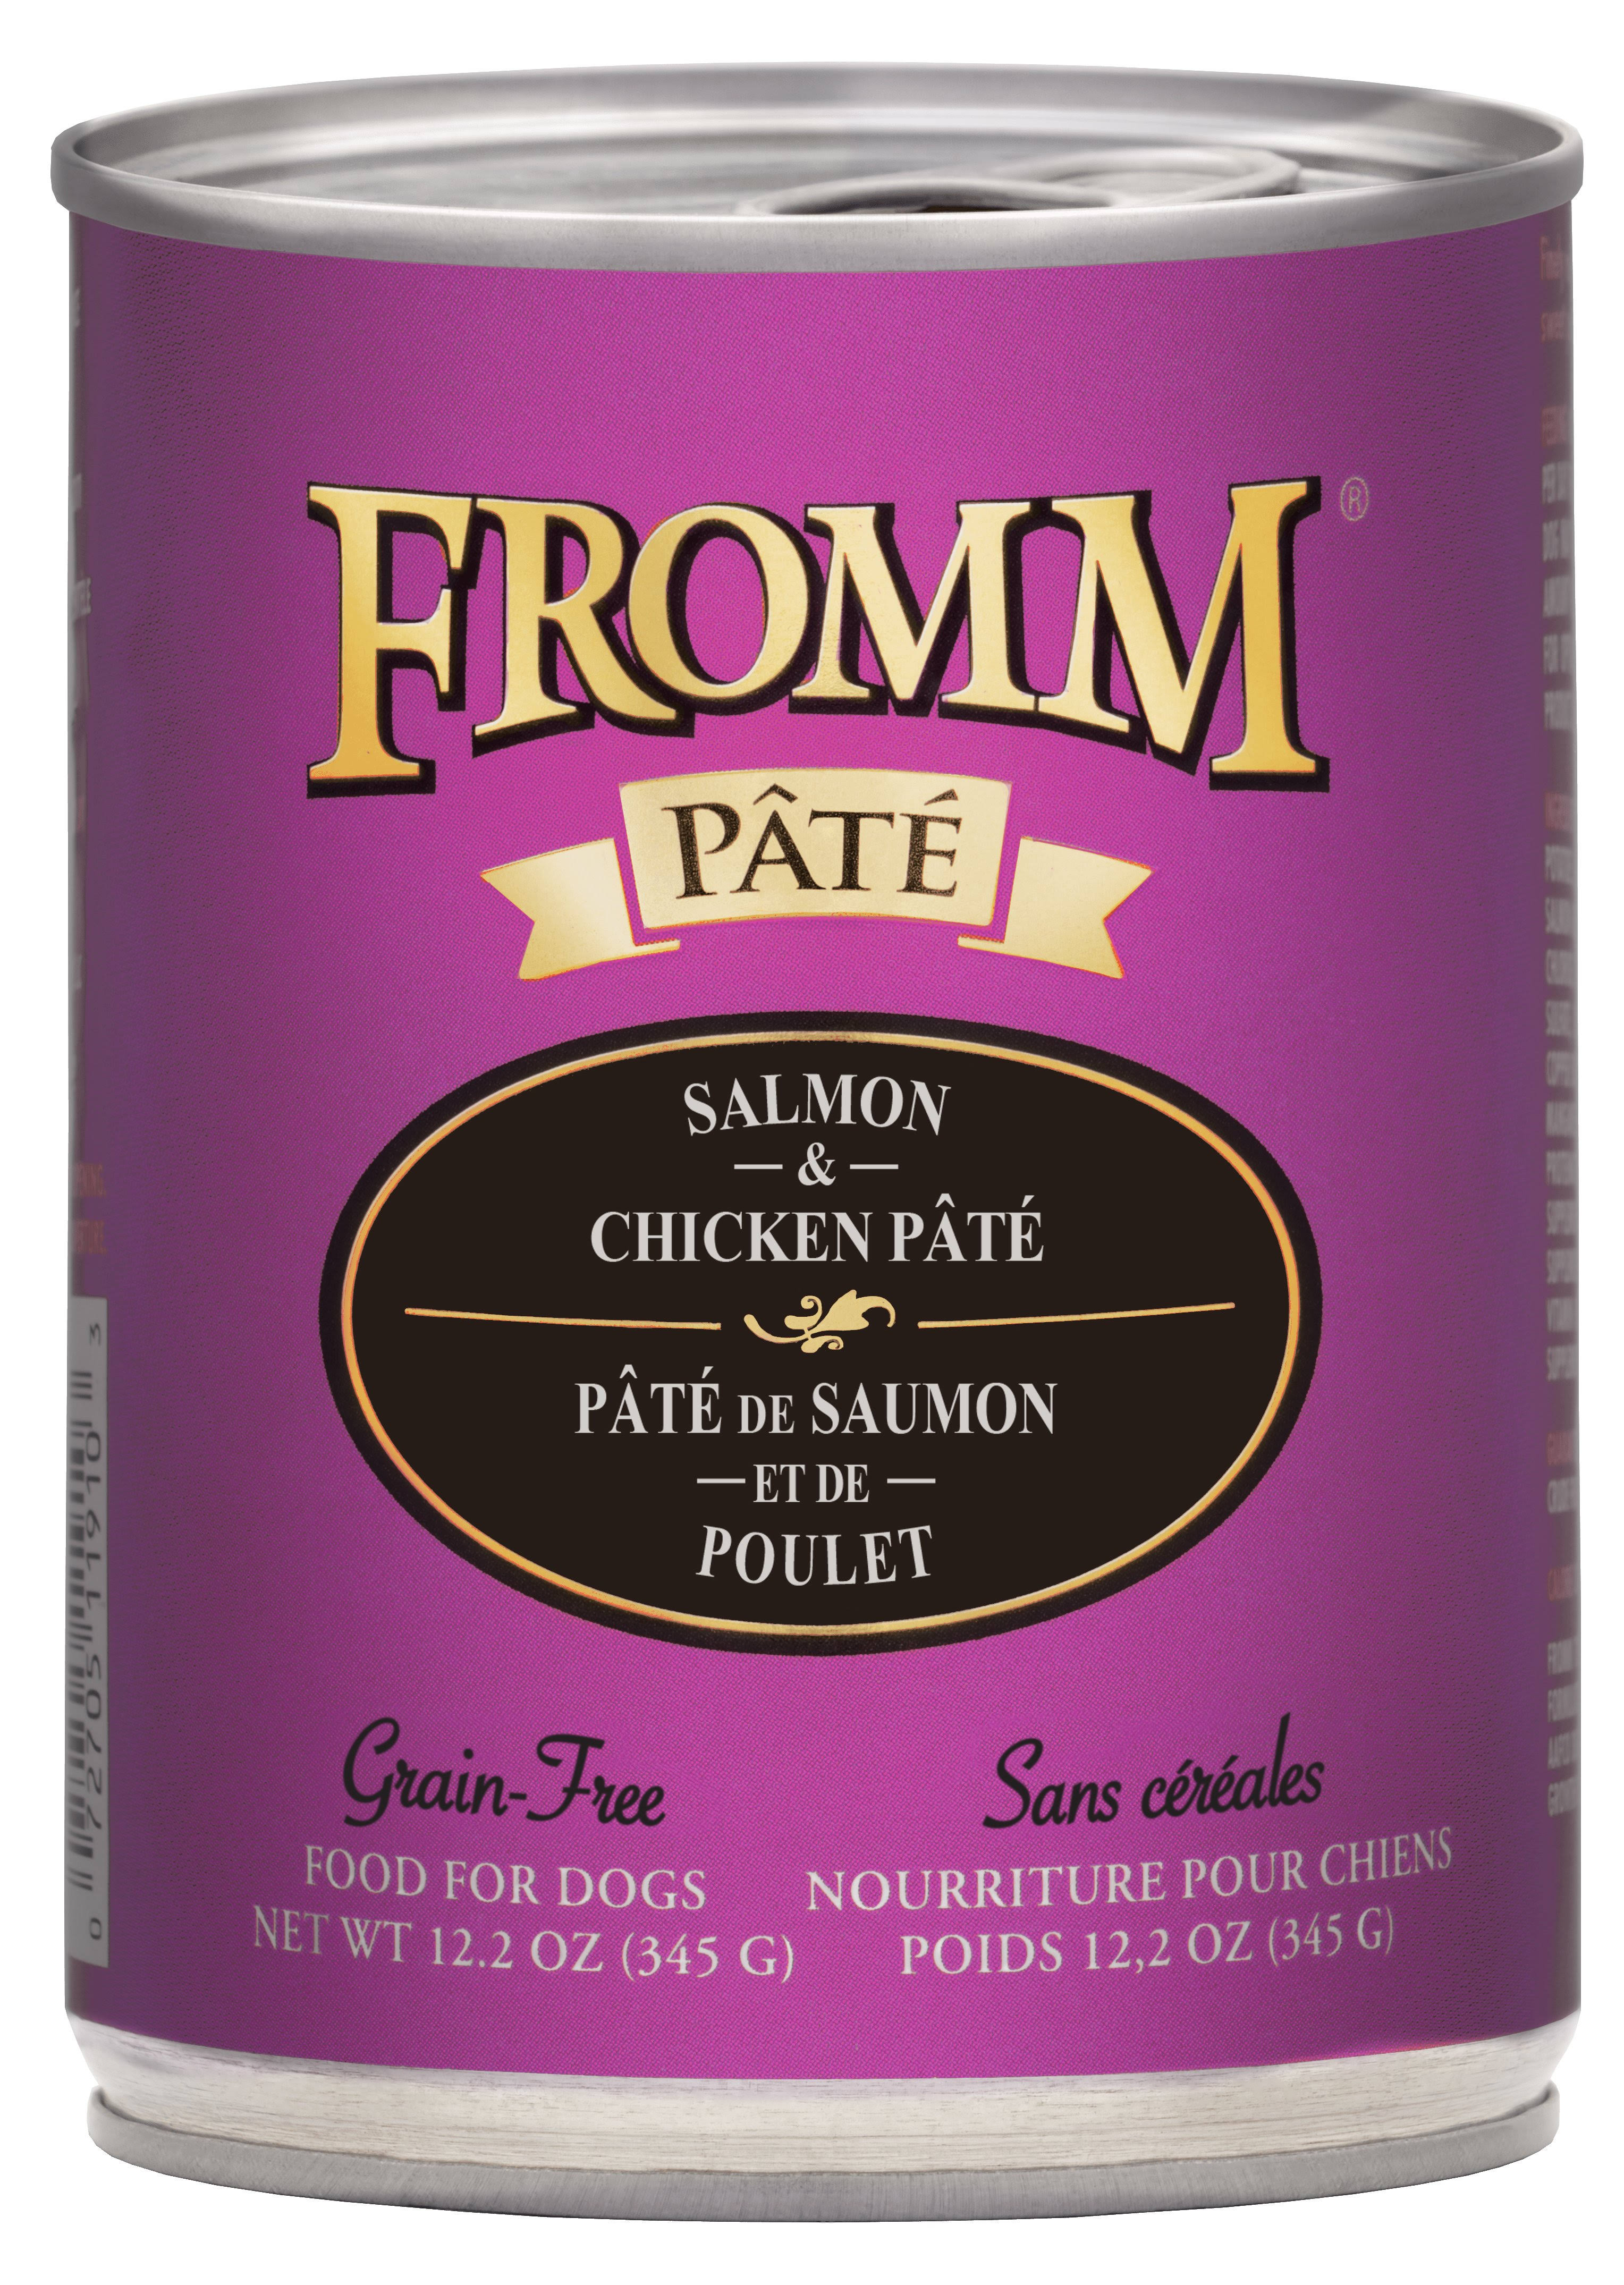 Fromm Gold Canned Dog Food 12.2Oz Salmon & Chicken Pate